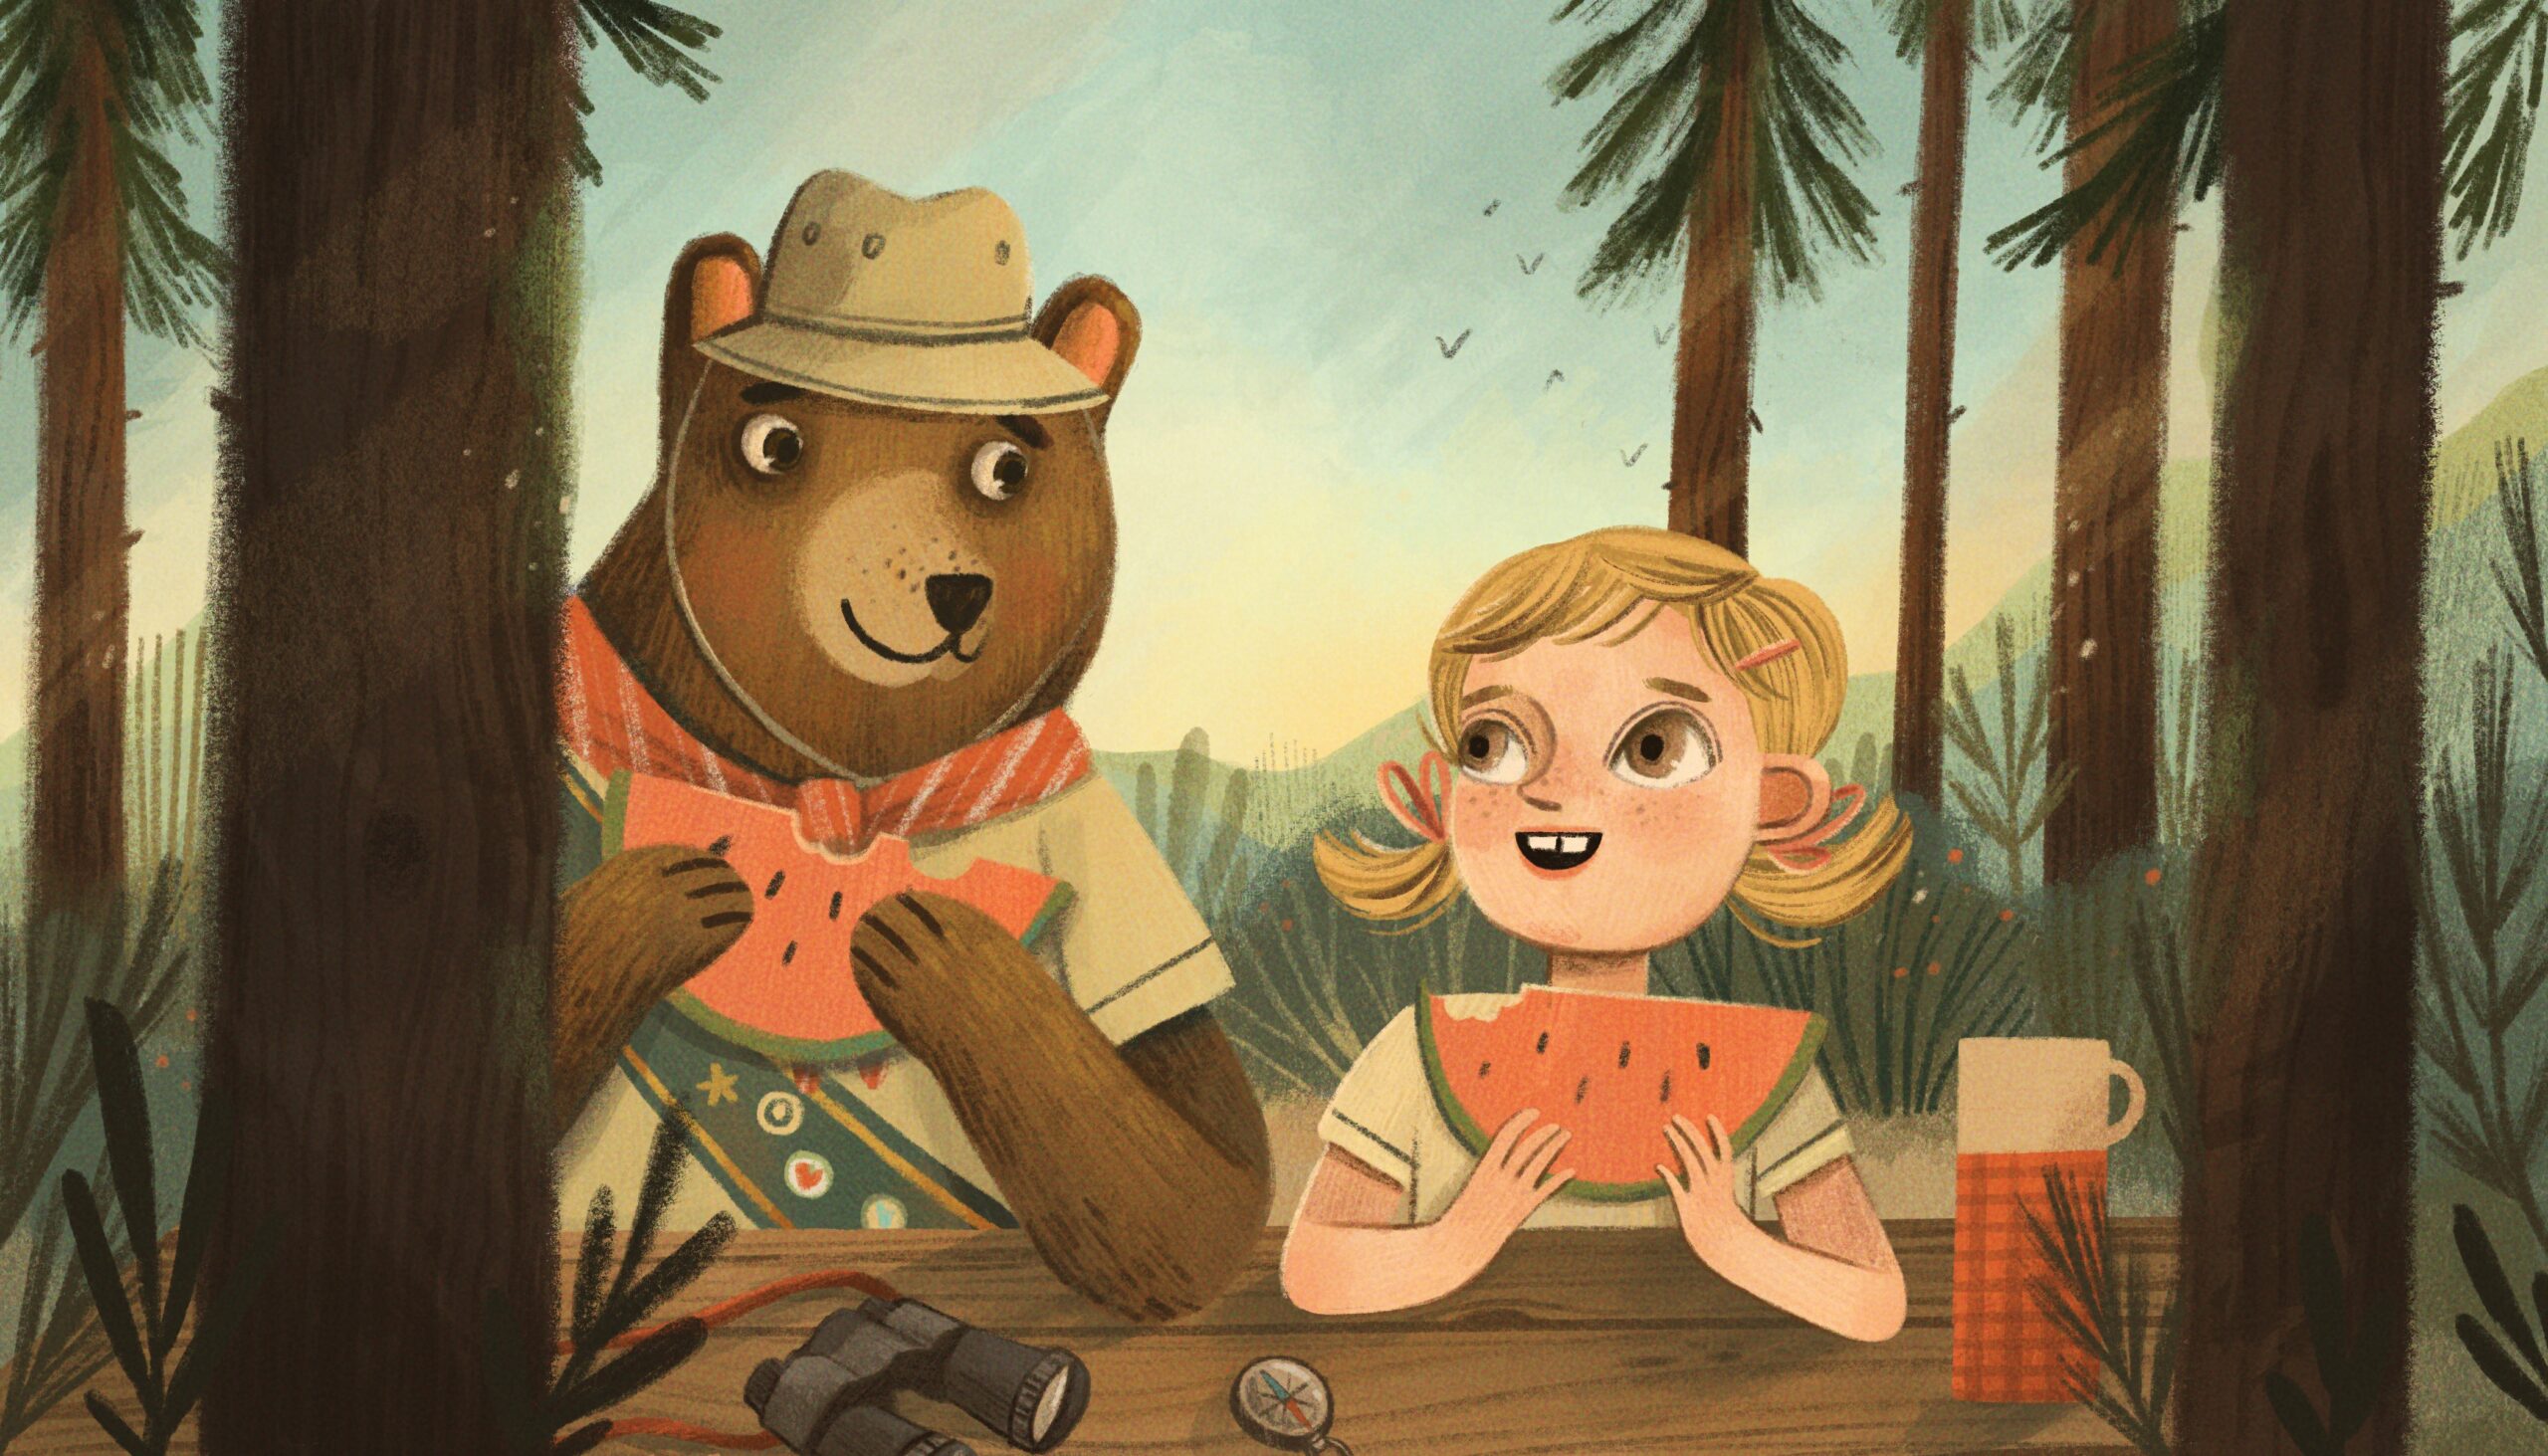 An illustation by Meneka Repka featuring a bear and girl eating watermelon together.